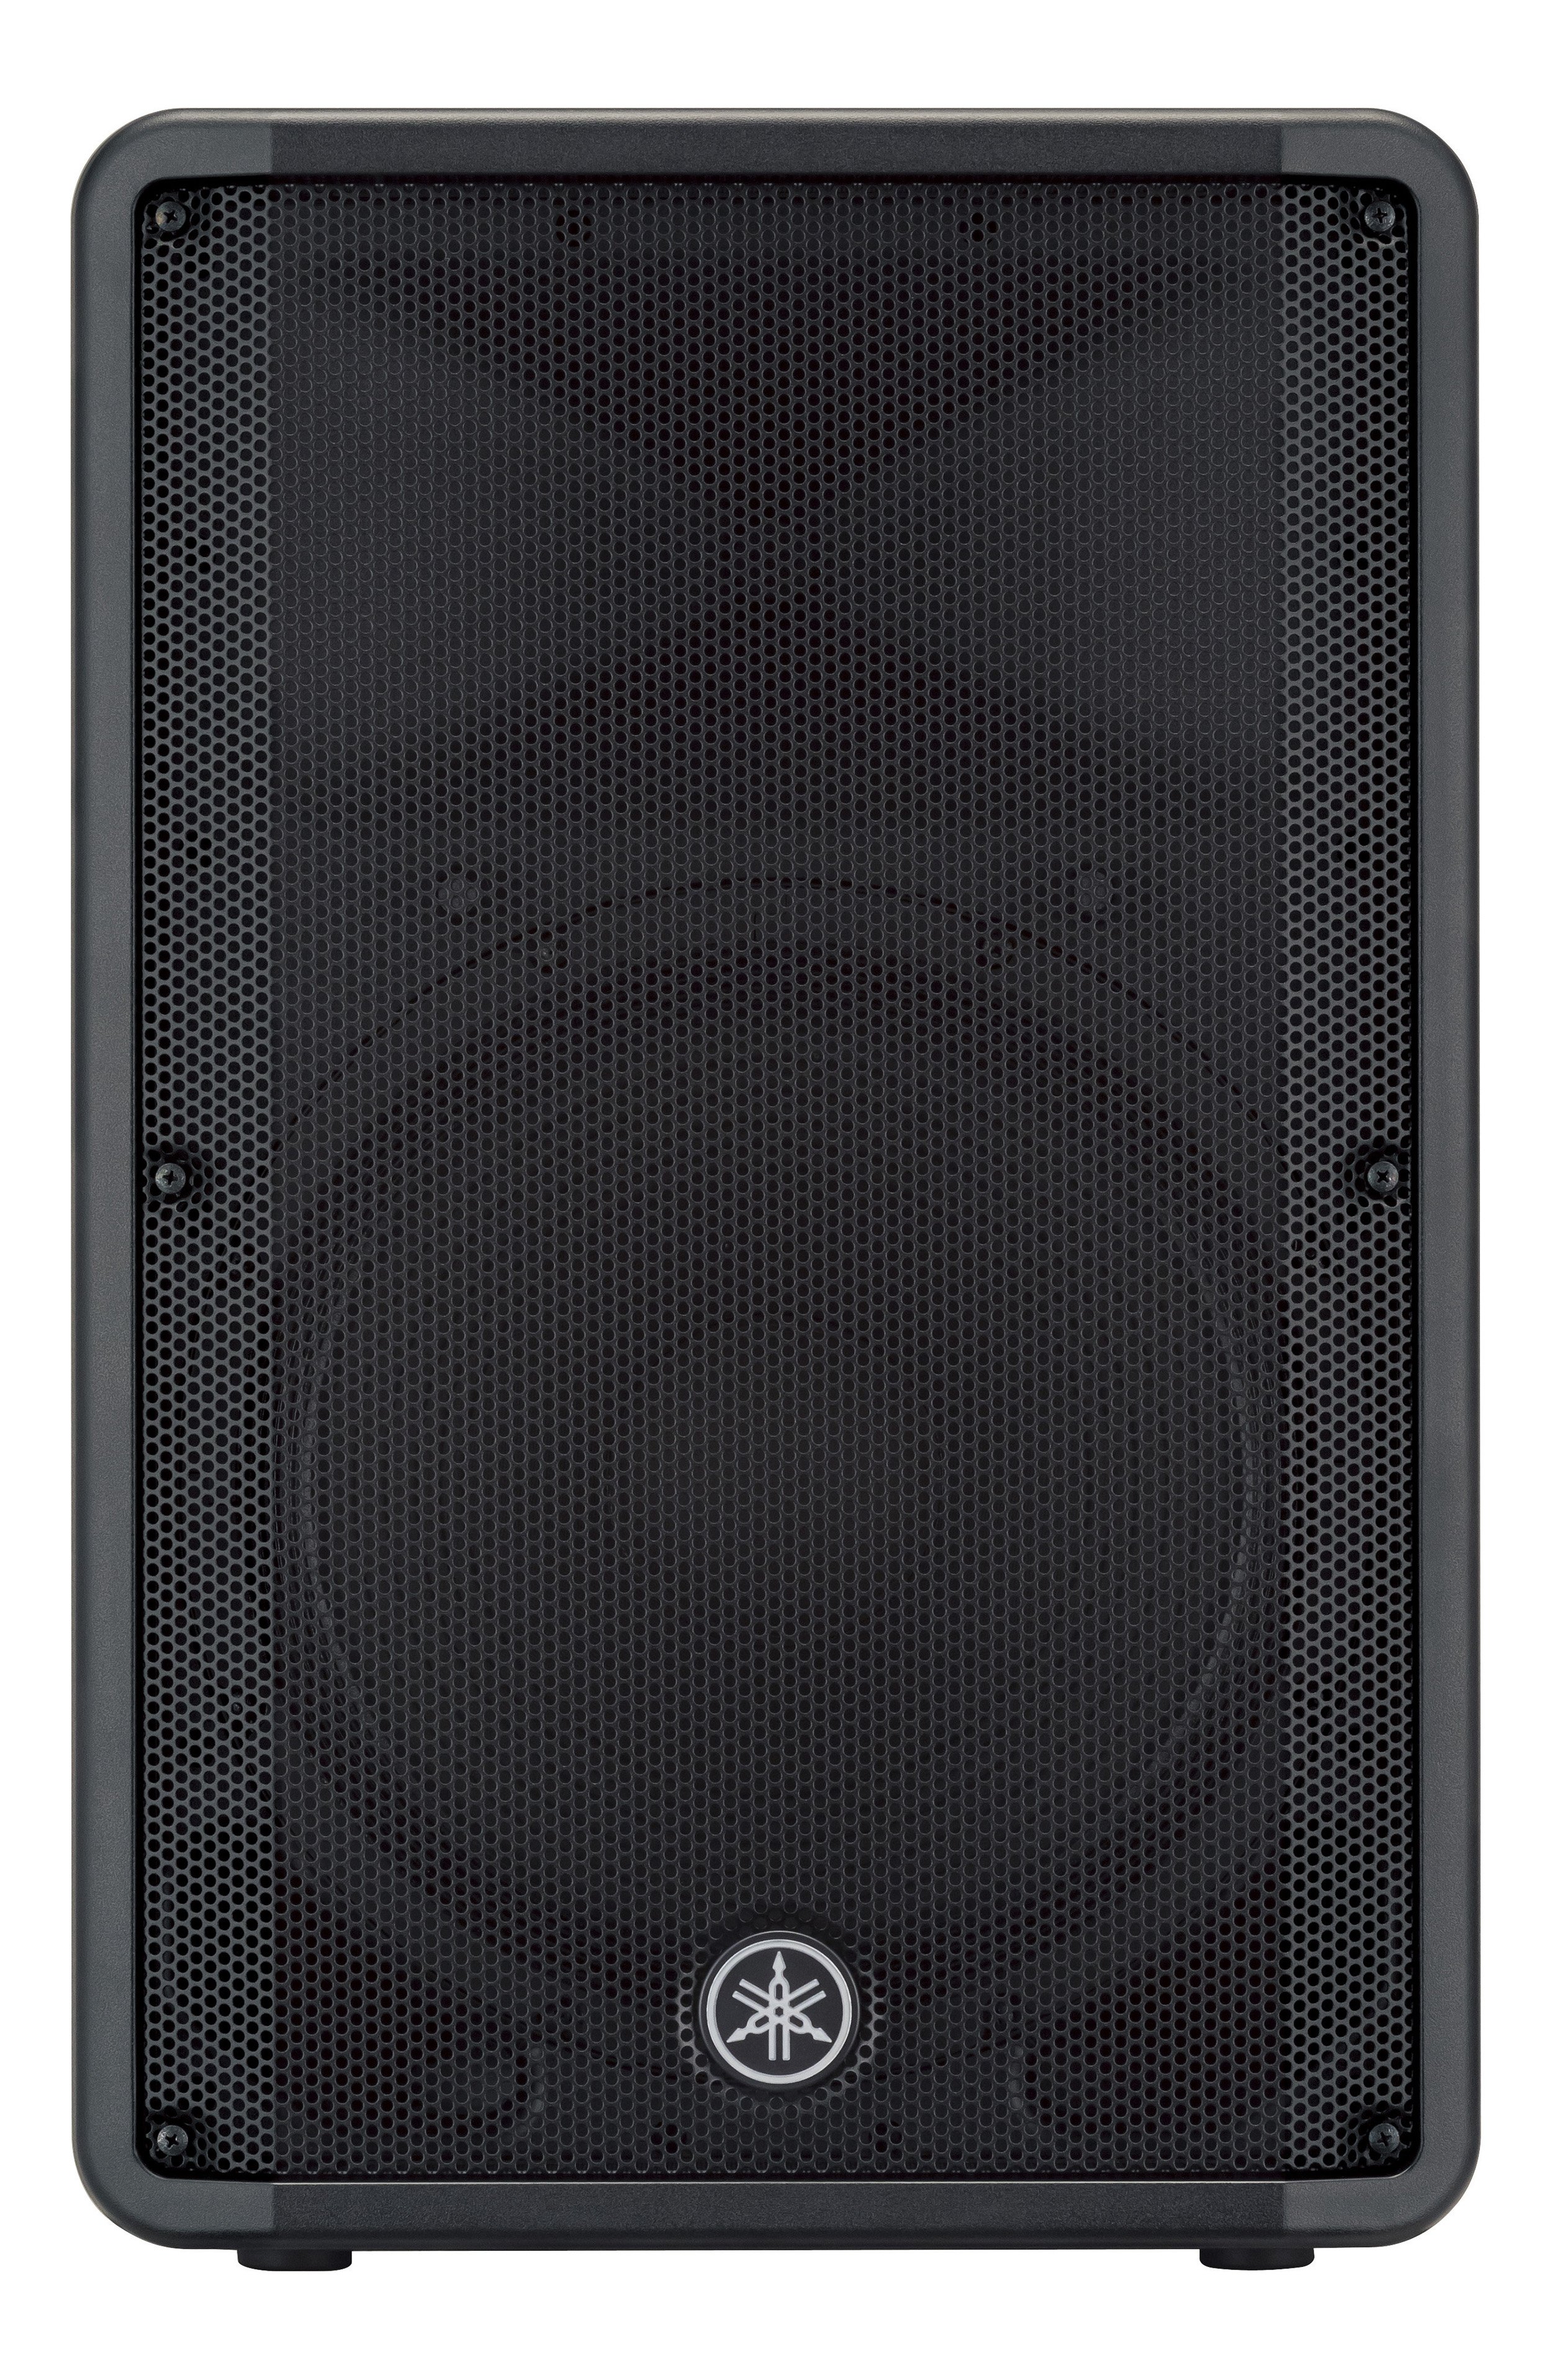 DBR series - Overview - Speakers - Professional Audio - Products 